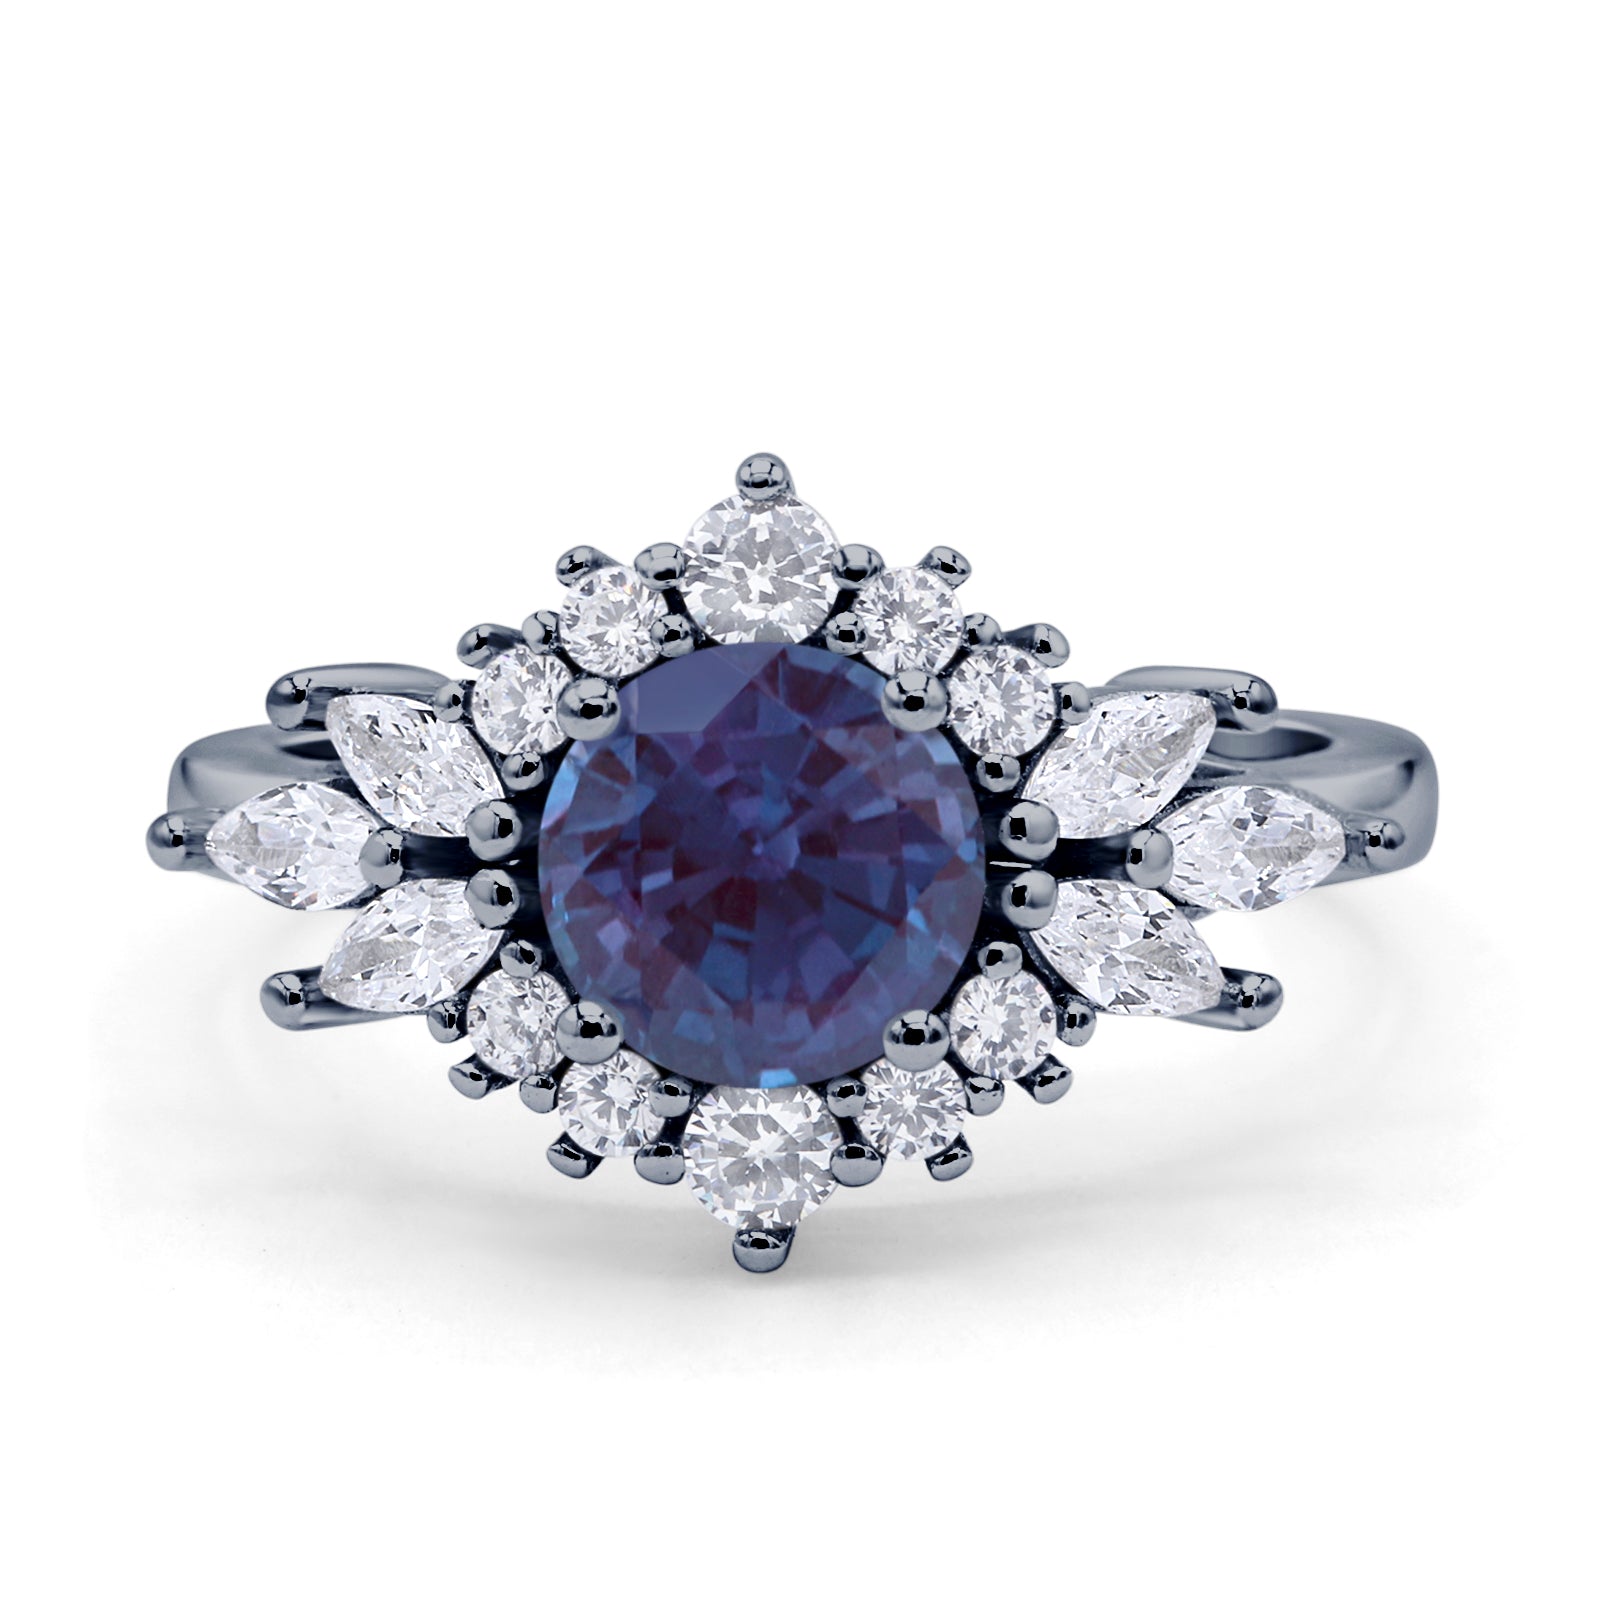 Art Deco Round Lab Alexandrite Engagement Ring With CZ Accents